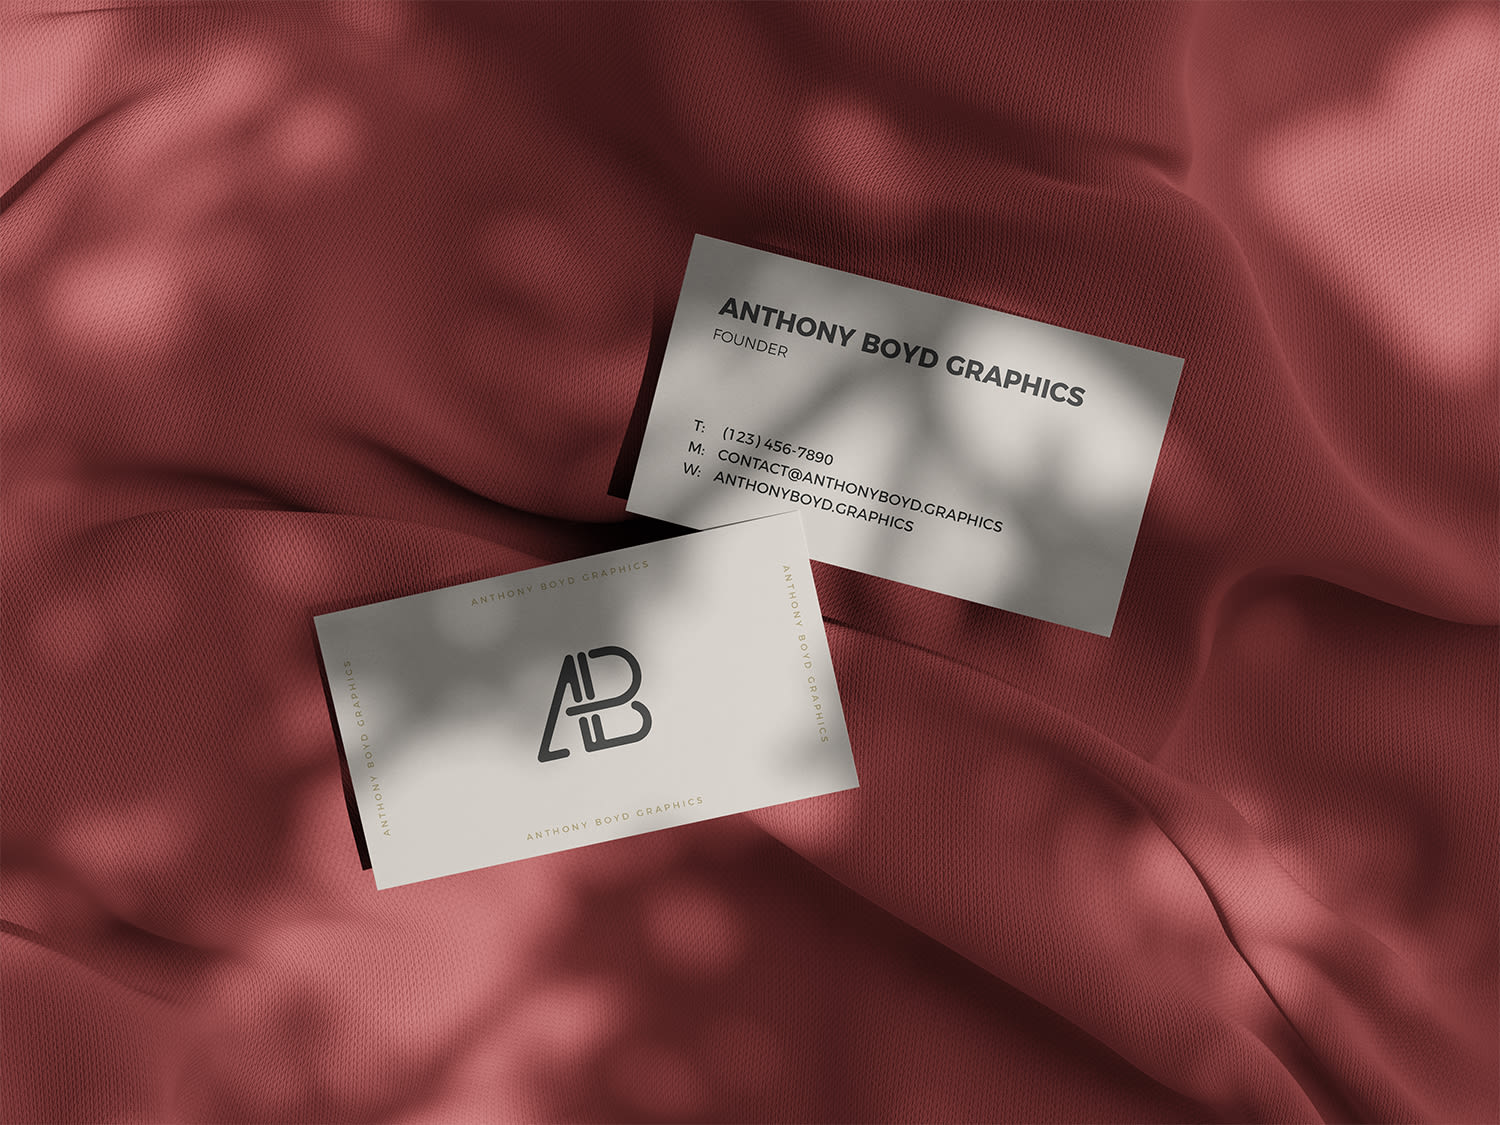 Business Card On Fabric Mockup by Anthony Boyd Graphics